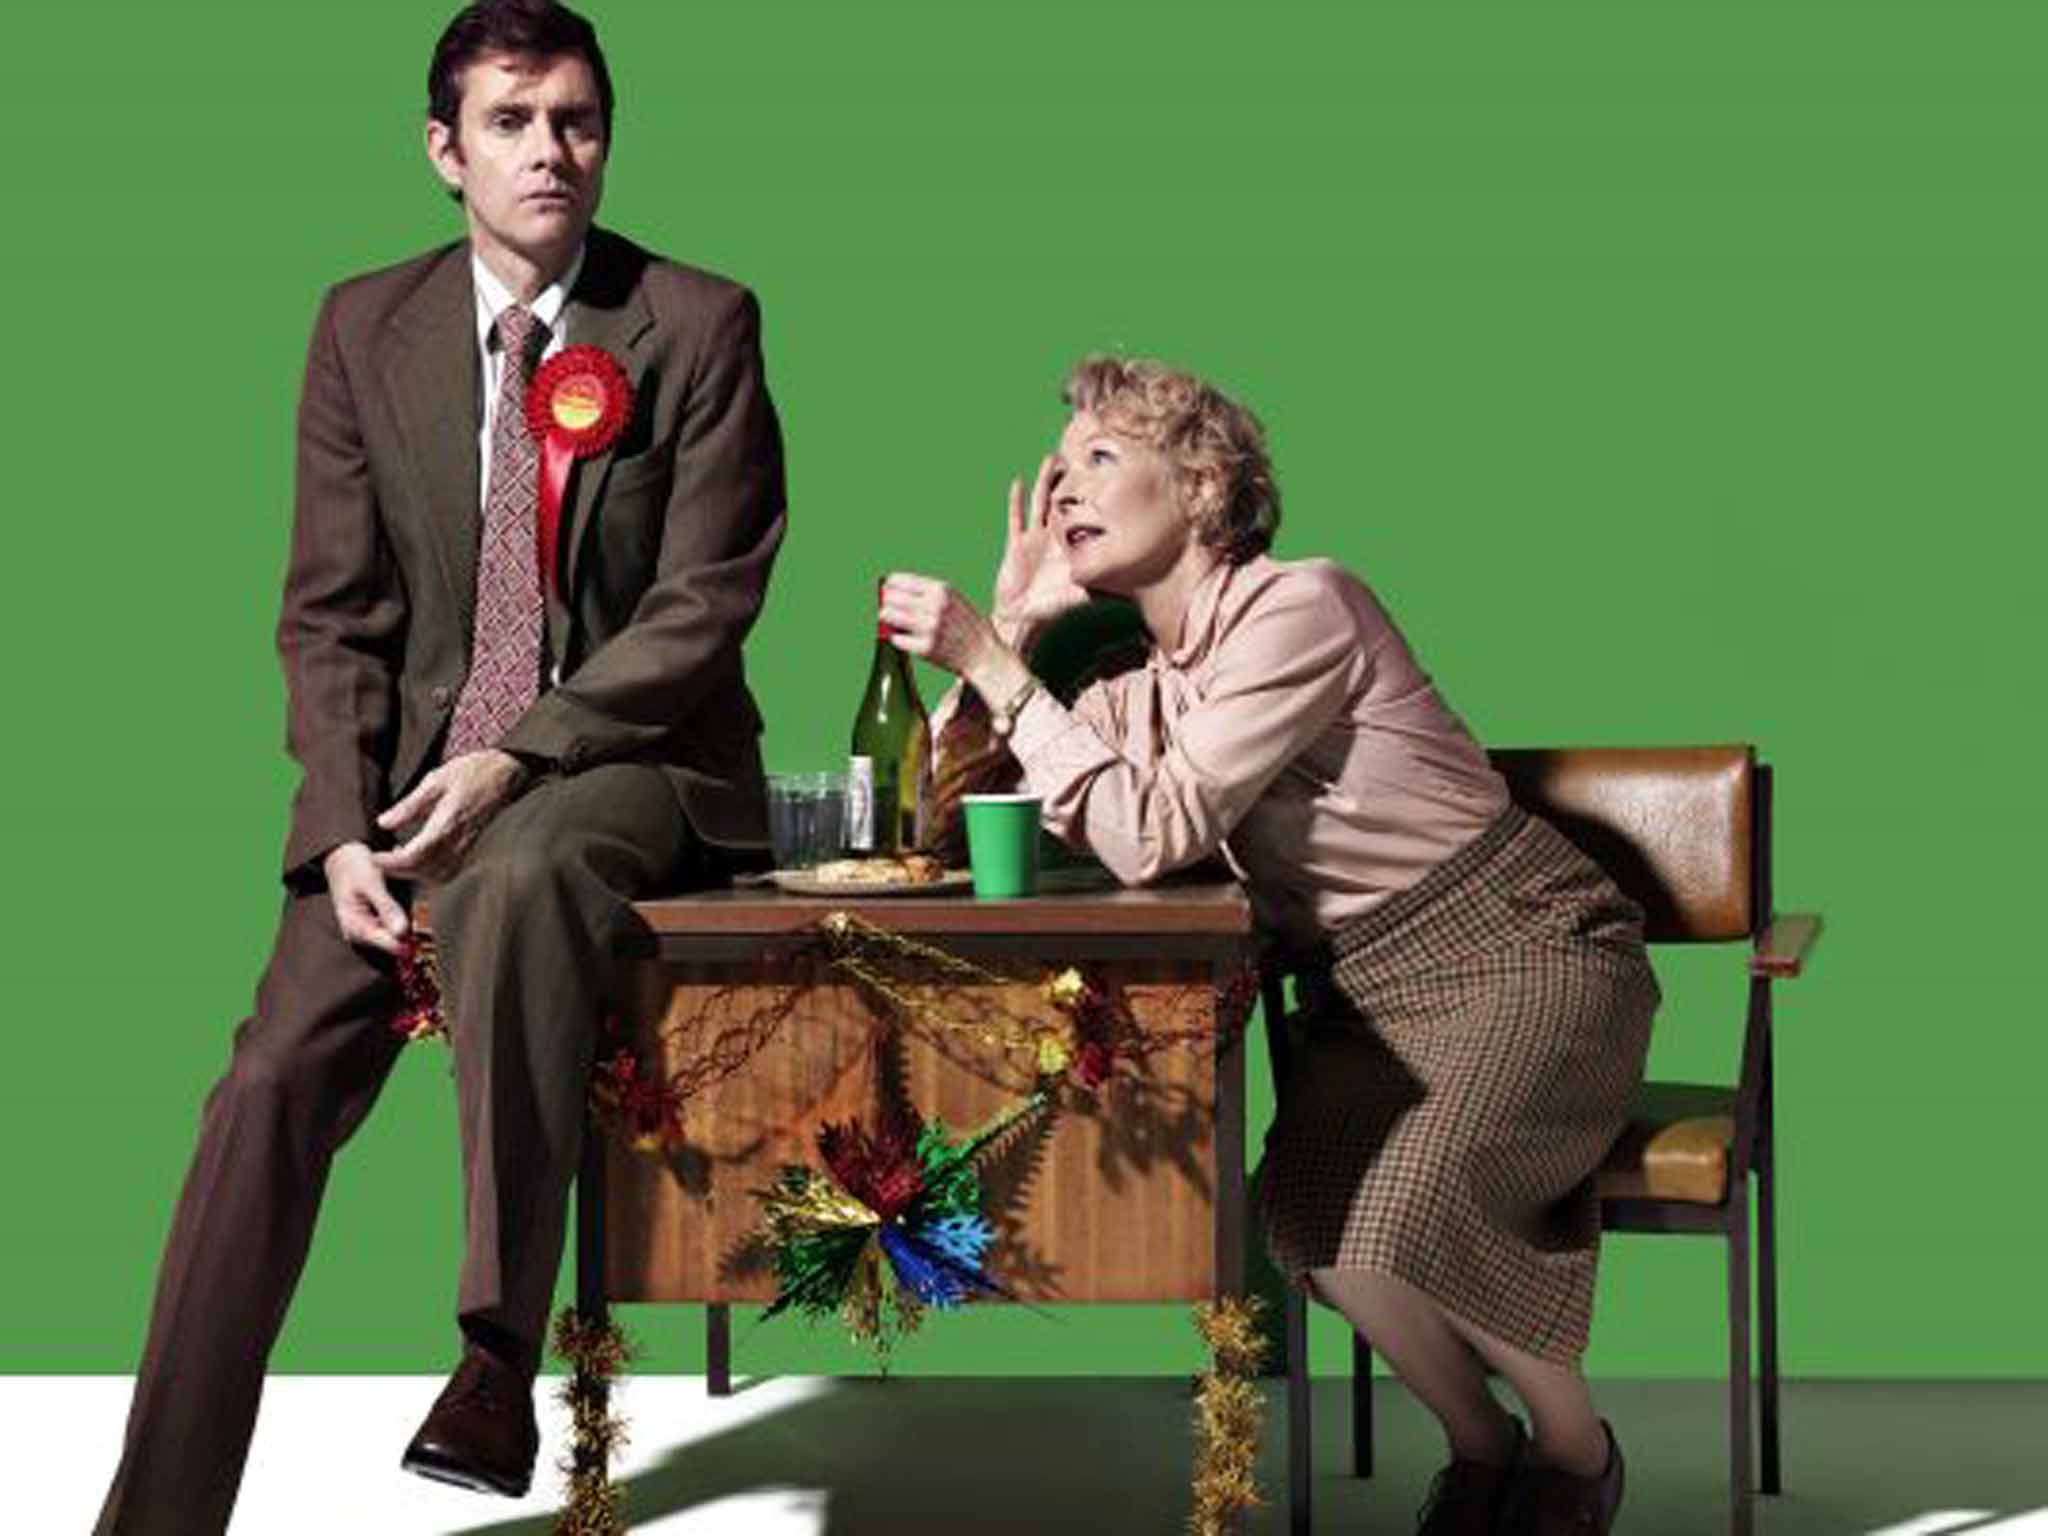 The party's over: Paul Higgins and Stella Gonet in 'Hope' at the Royal Court